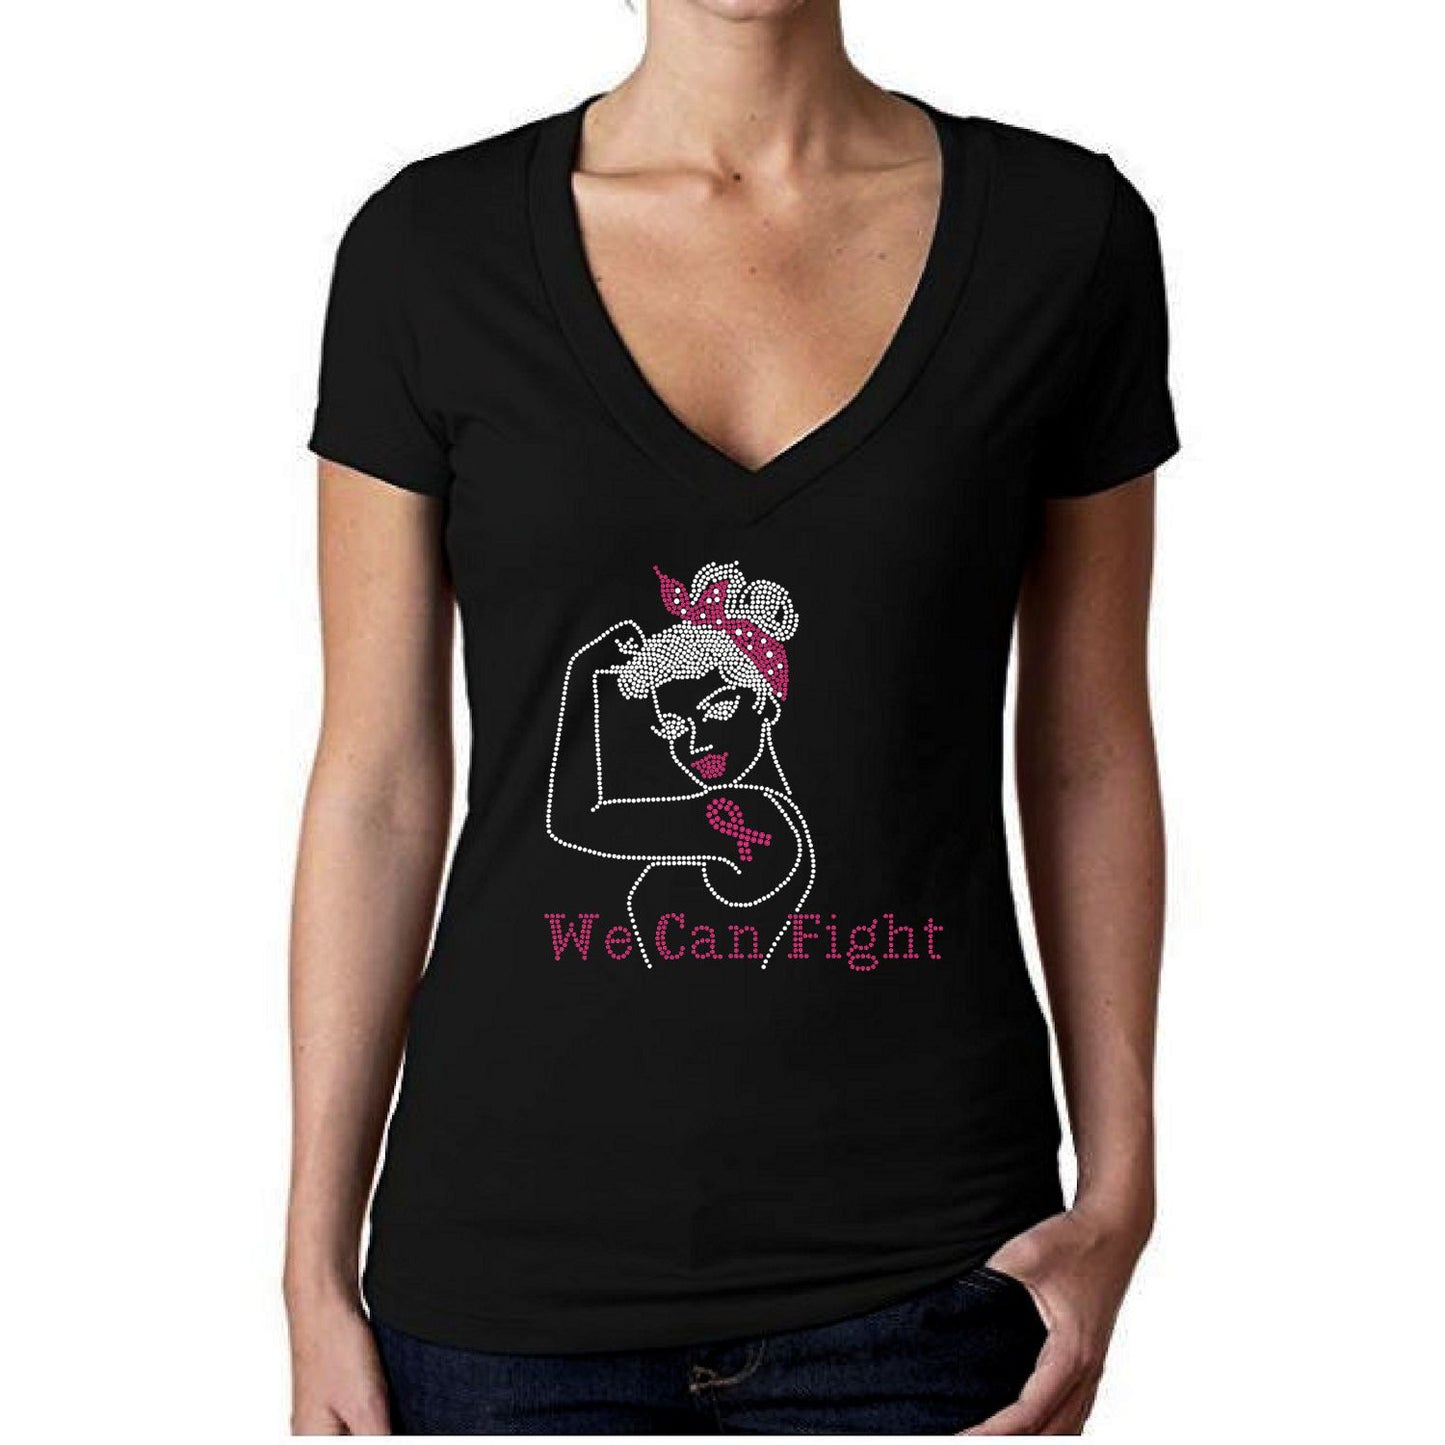 We Can Fight Breast Cancer Awareness Tee